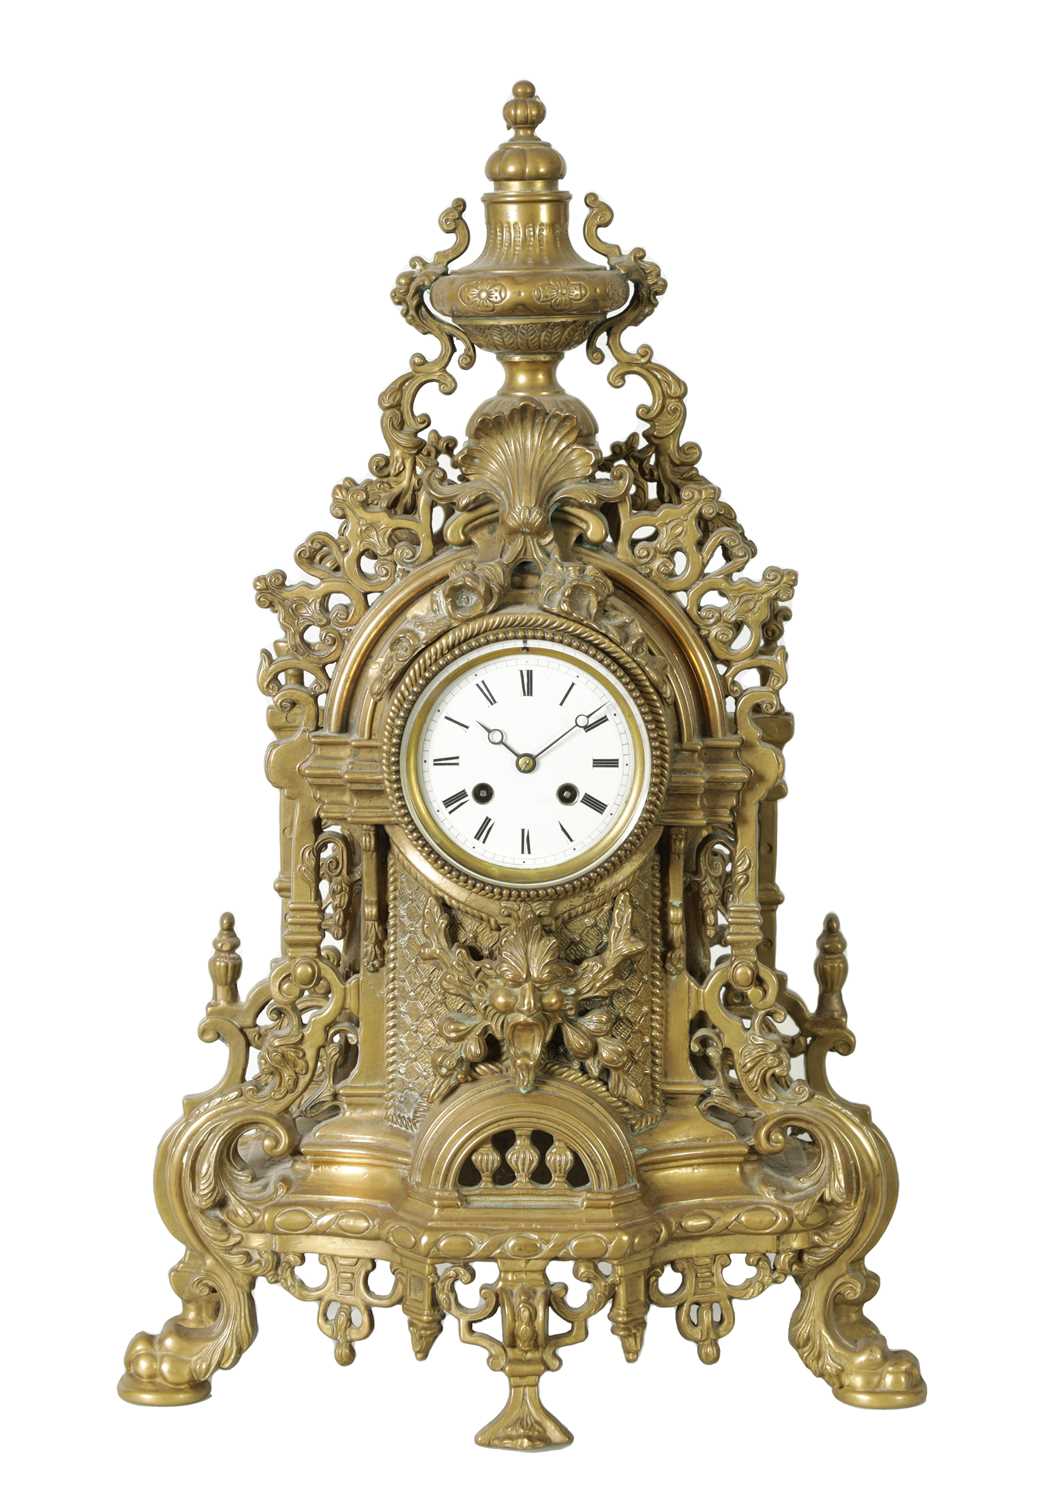 A LATE 19TH CENTURY FRENCH ORNATE AND PIERCED BRASS MANTEL CLOCK OF LARGE SIZE